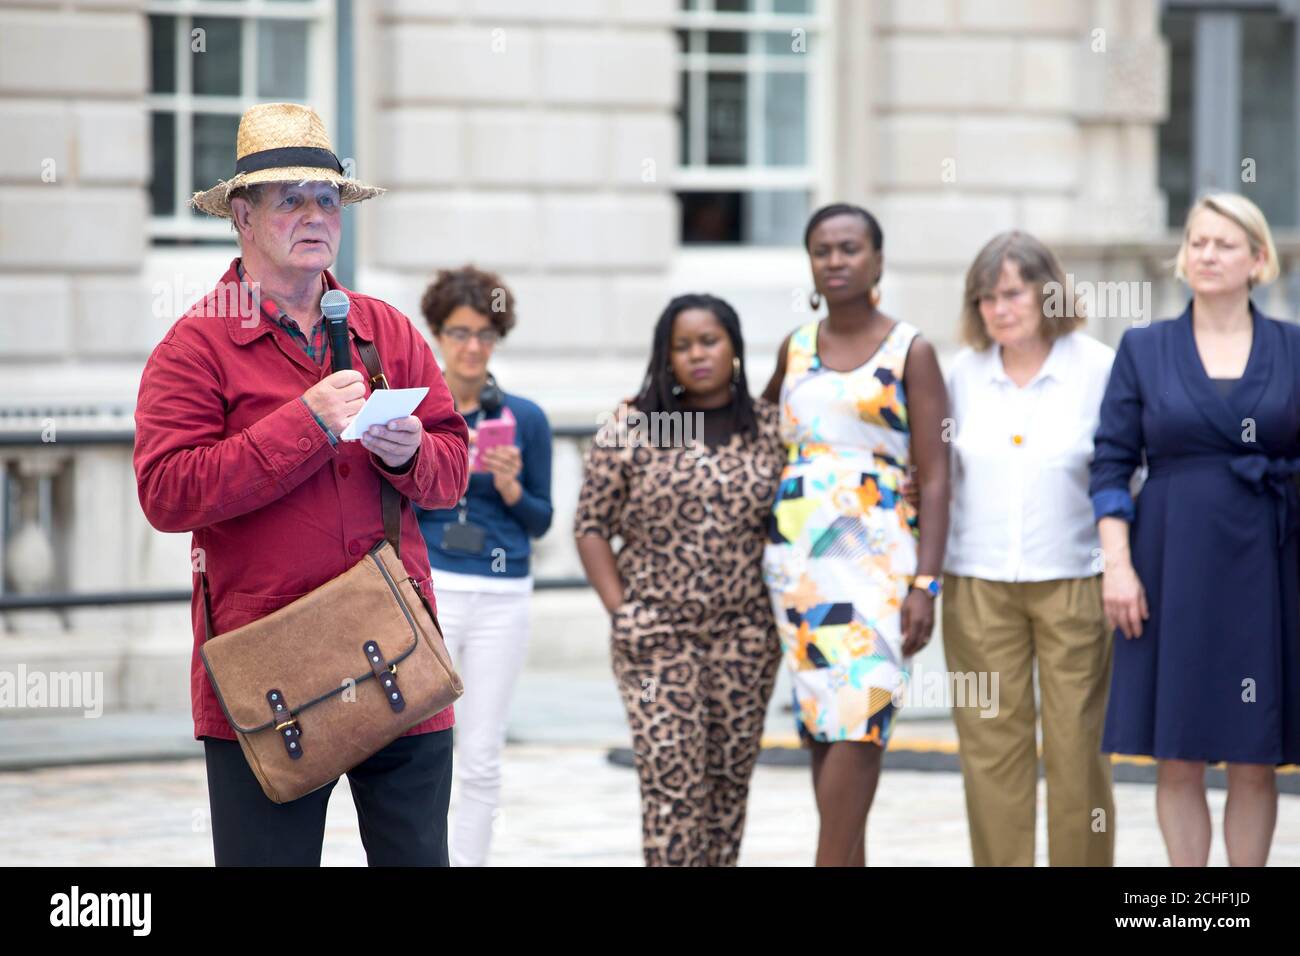 EDITORIAL USE ONLY Writer Michael Morpurgo speaks at the Fly The Flag event at Somerset House to celebrate the start of a week of events and a new human rights flag designed by artist and activist Ai Weiwei, which has been commissioned by a wide-ranging group of arts organisations and human rights charities to mark the 70th anniversary of the Universal Declaration of Human Rights at Somerset House in London. Stock Photo